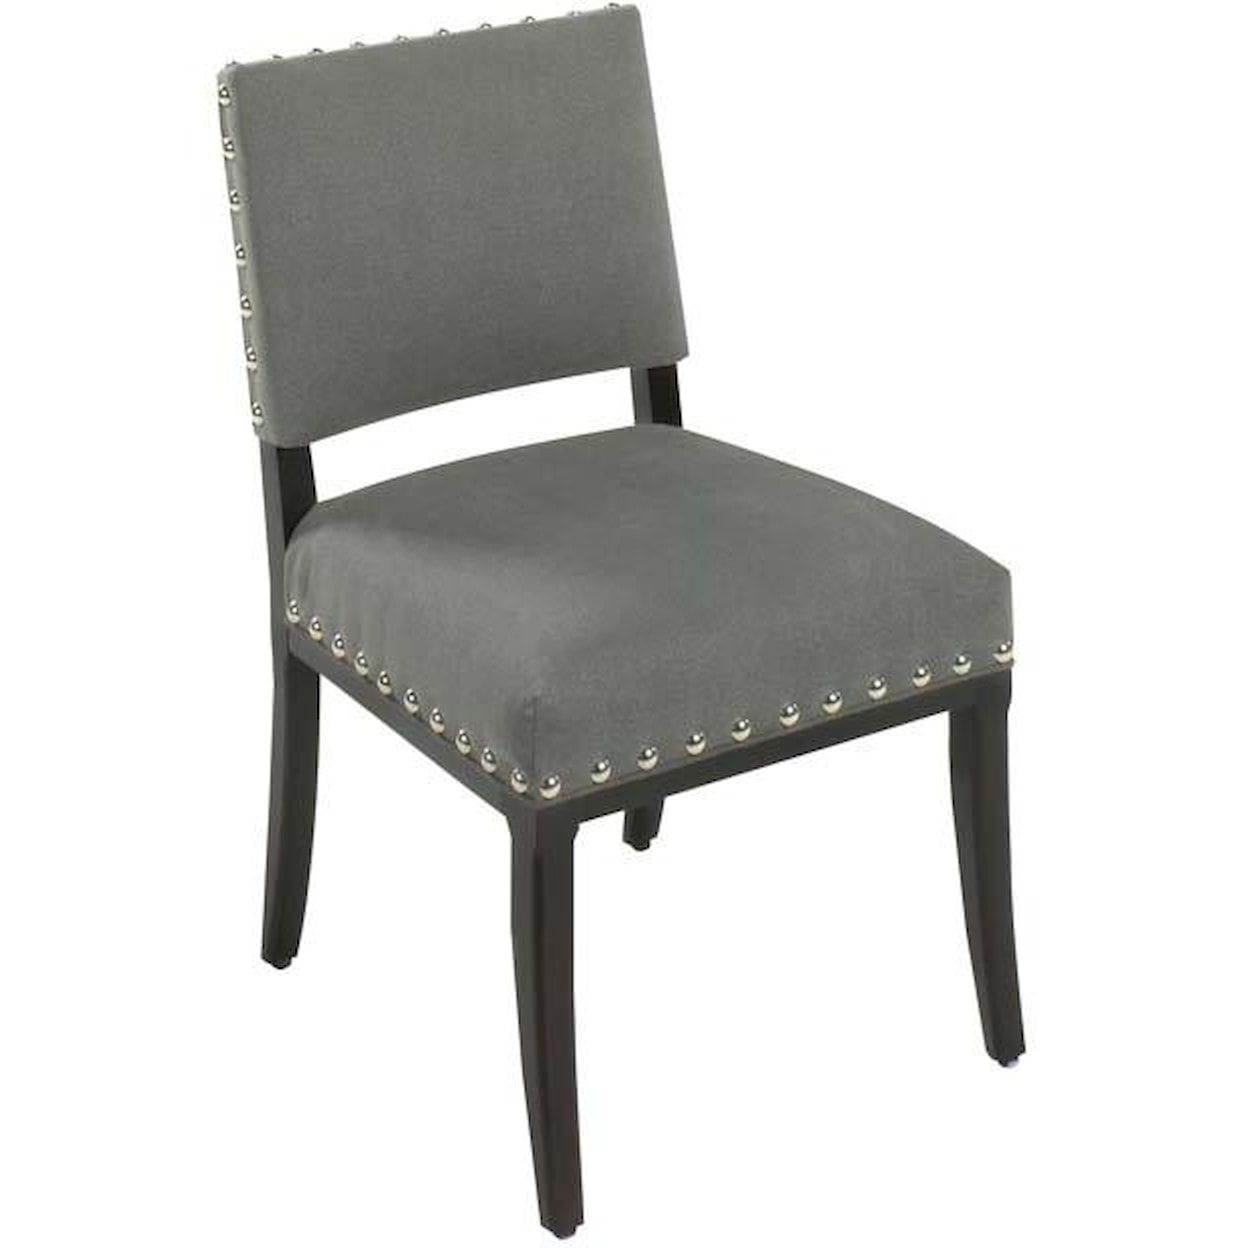 Designmaster Chairs  Side Chair